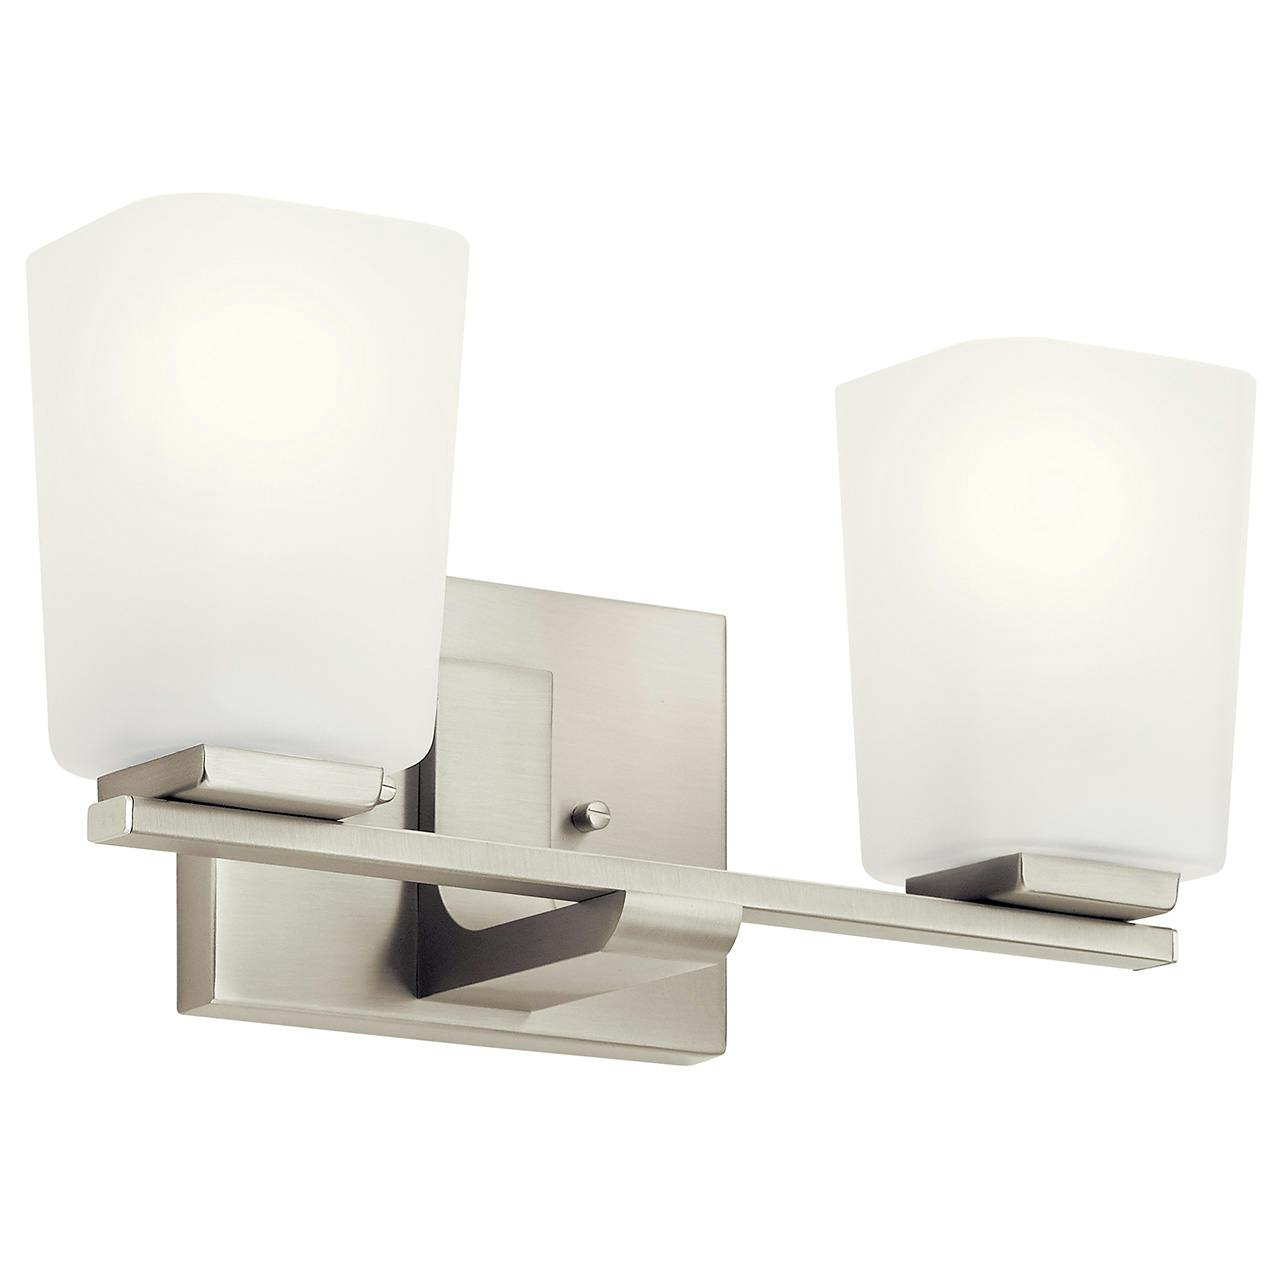 Roehm 2 Light Vanity Light Brushed Nickel on a white background